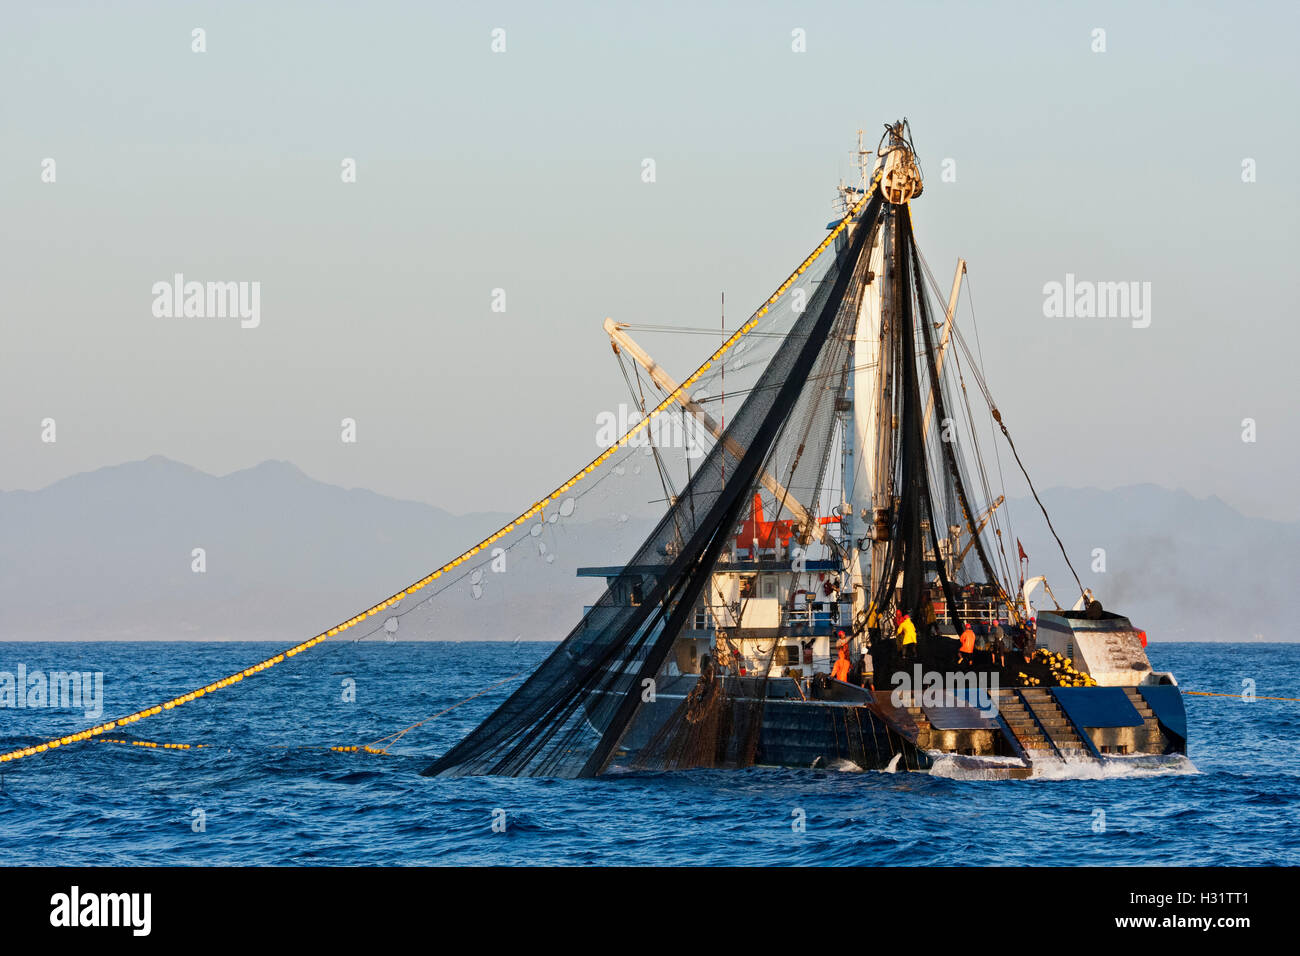 commercial tuna fishing boat pulling in its net off the coast of